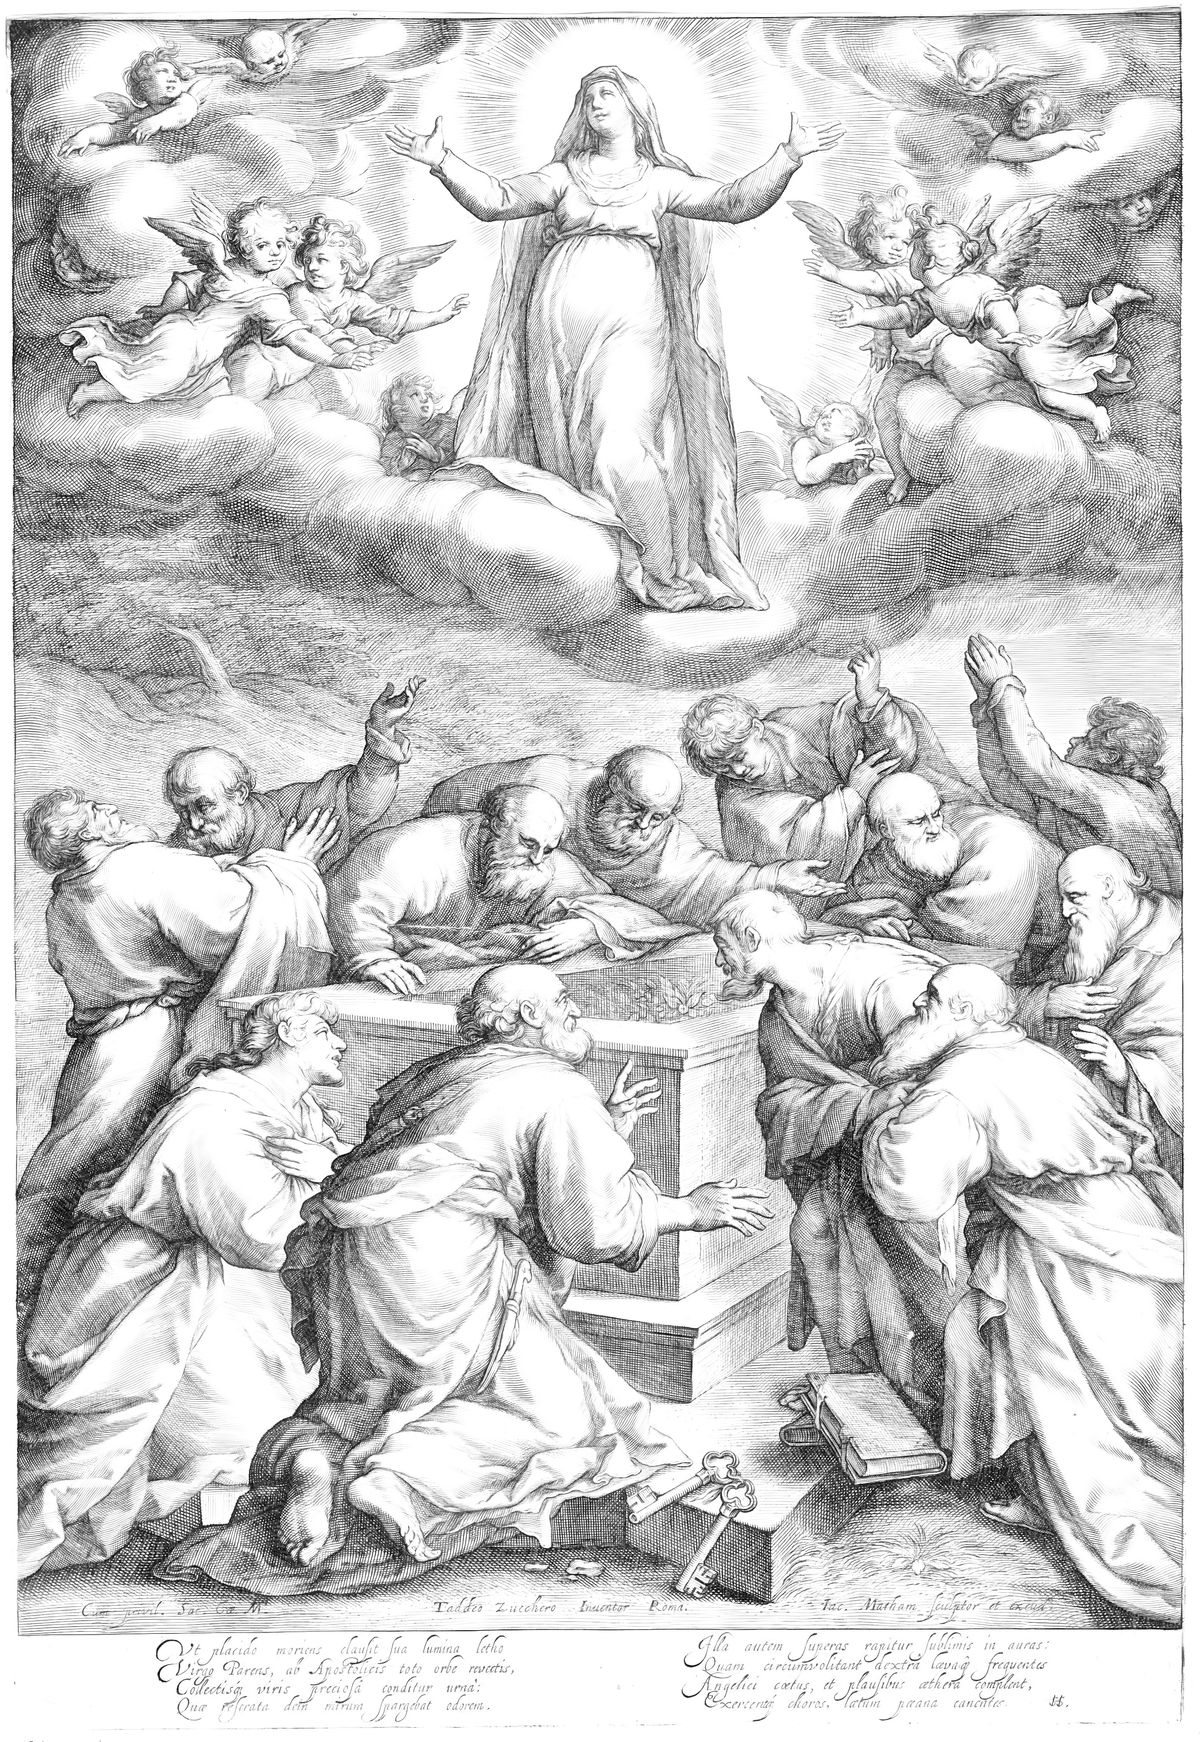 Assumption of Mary (1581-1611) by Jacob Matham - Catholic Coloring Page